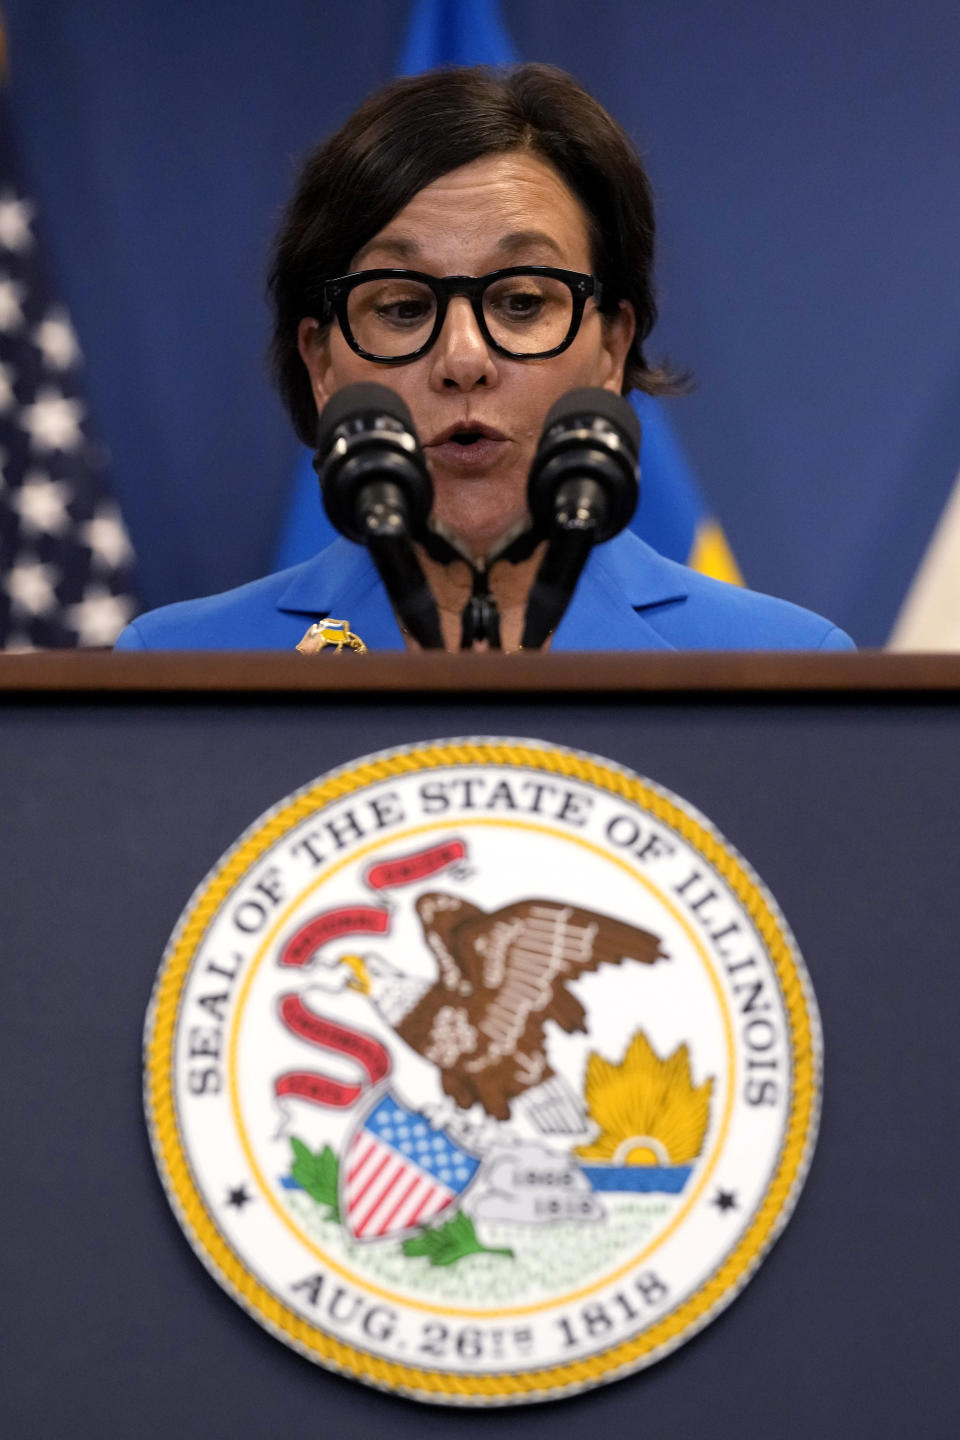 U.S. Special Representative for Ukraine's Economic Recovery Penny Pritzker speaks at a news conference in Chicago, Tuesday, April 16, 2024. Ukrainian Prime Minister Denys Shmyhal, Illinois Governor J.B. Pritzker, and U.S. Special Representative for Ukraine's Economic Recovery Pritzker delivered joint remarks recognizing the Illinois-Ukraine partnership. (AP Photo/Nam Y. Huh)